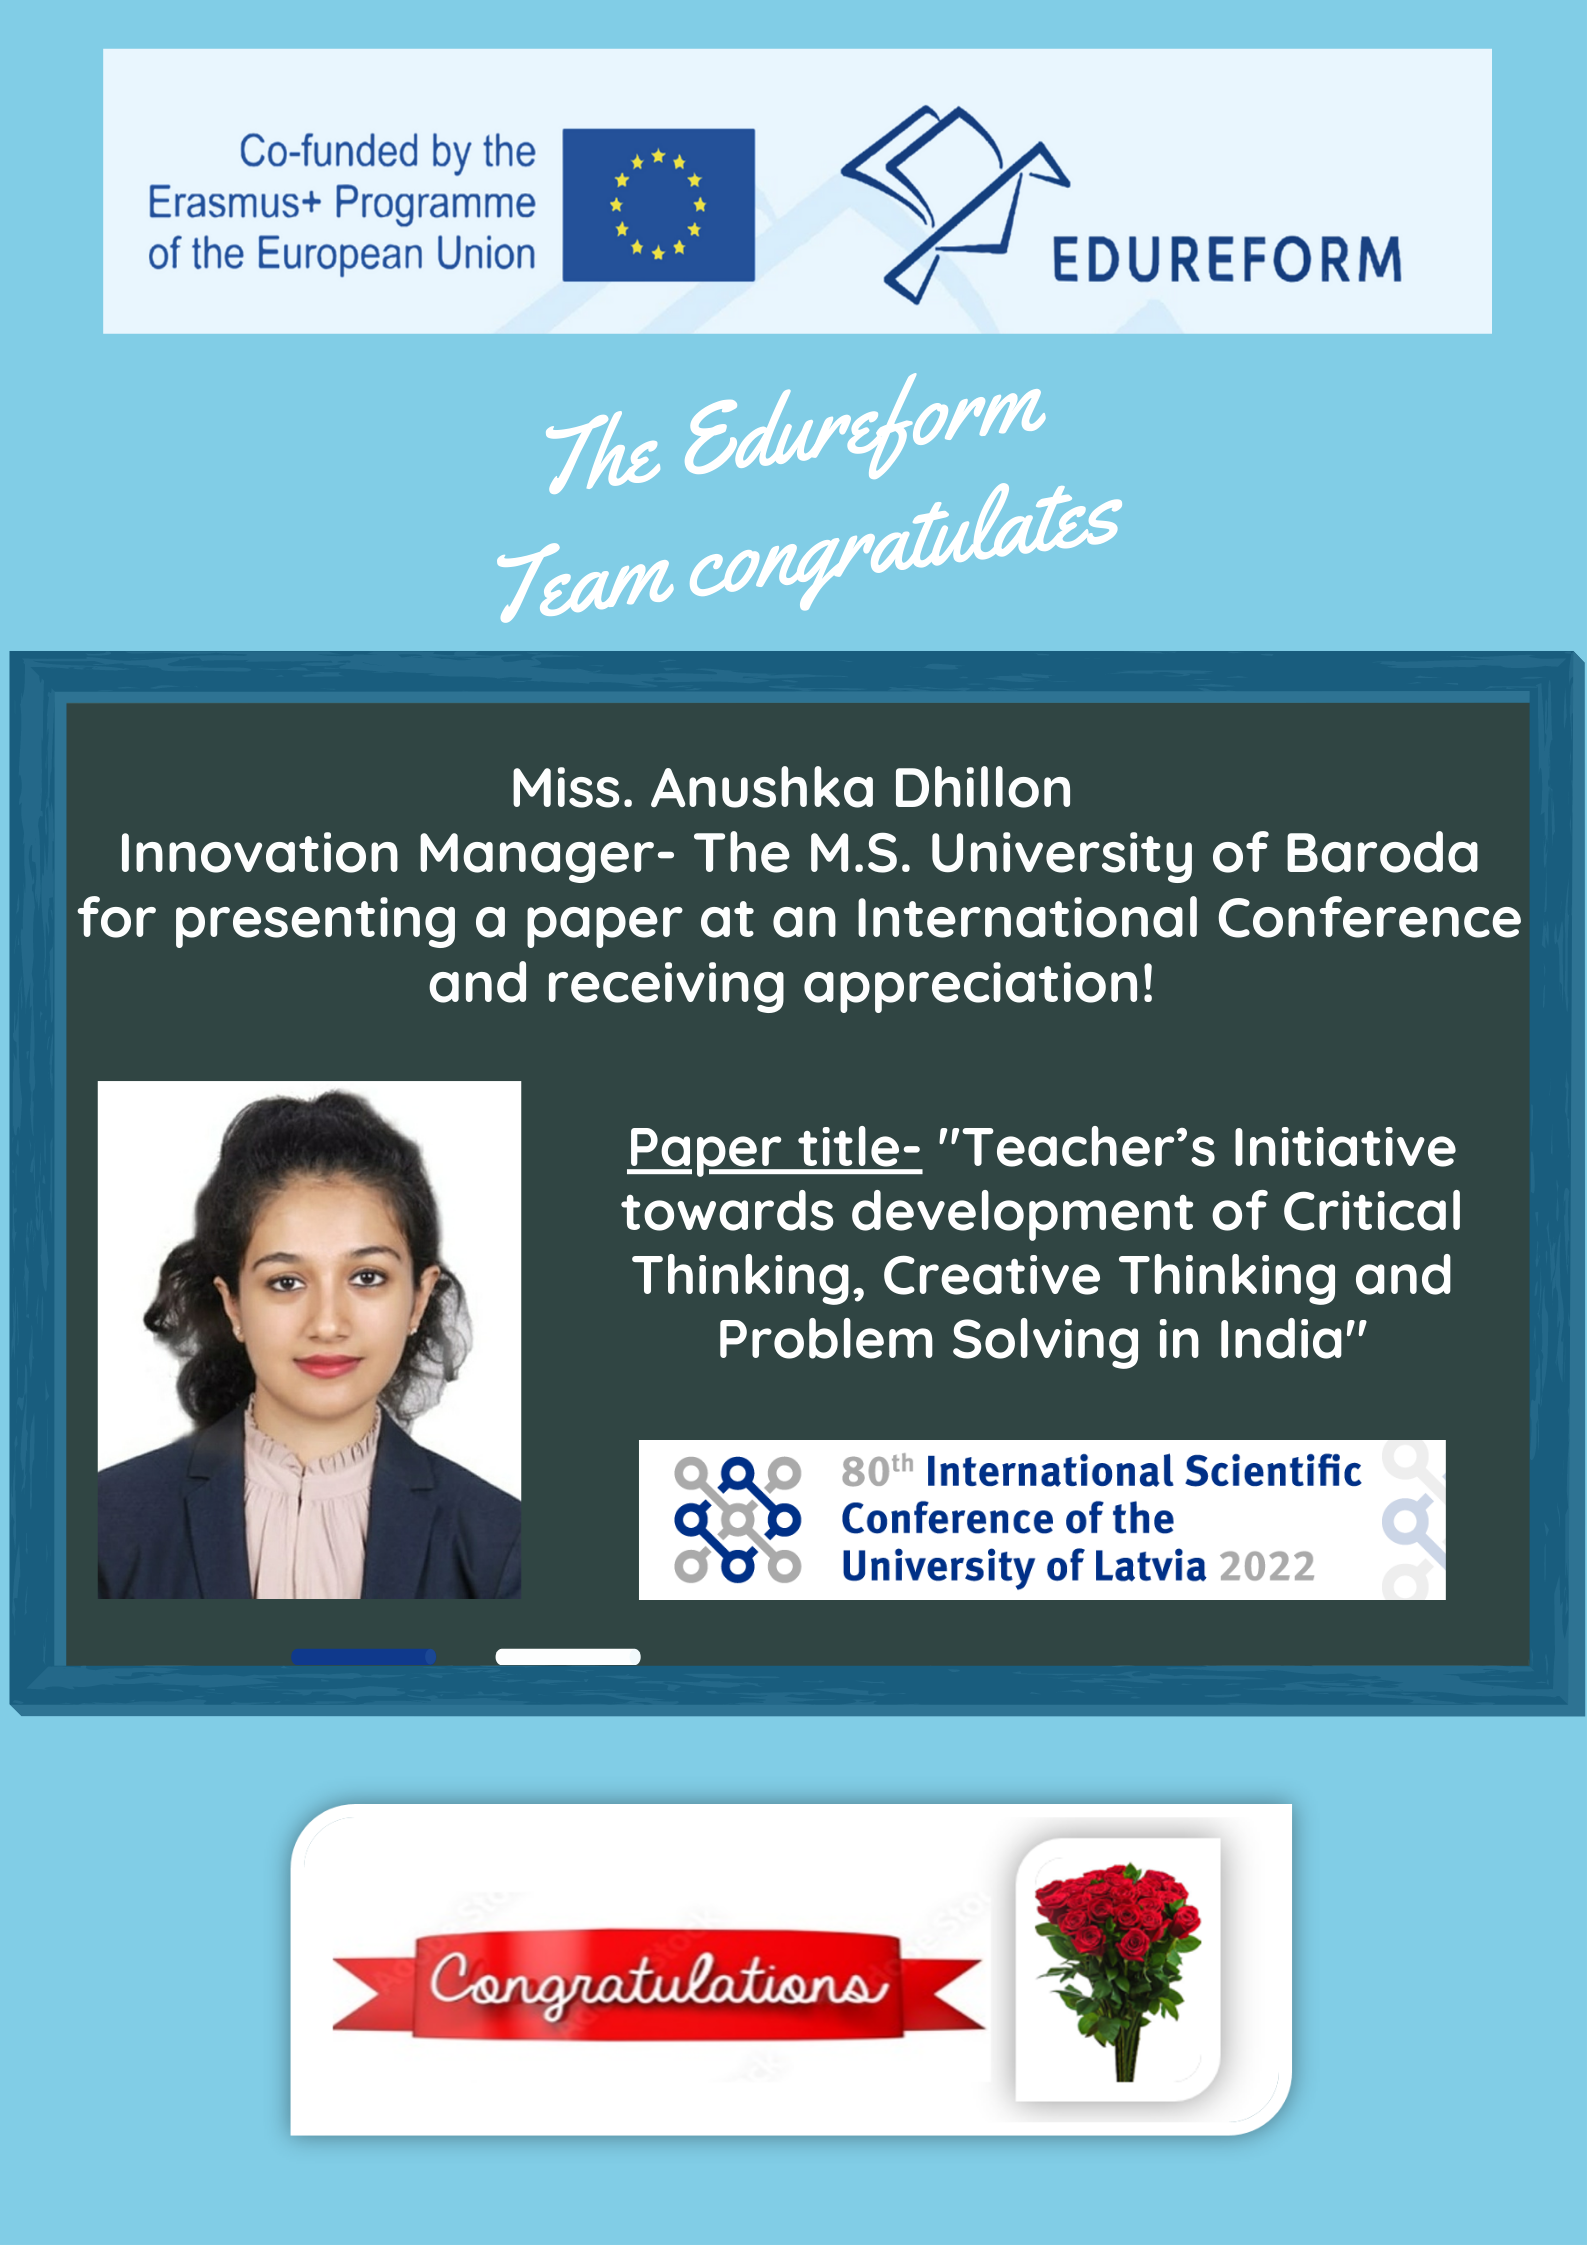 EDUREFORM Innovation Manager presents her research during International Conference